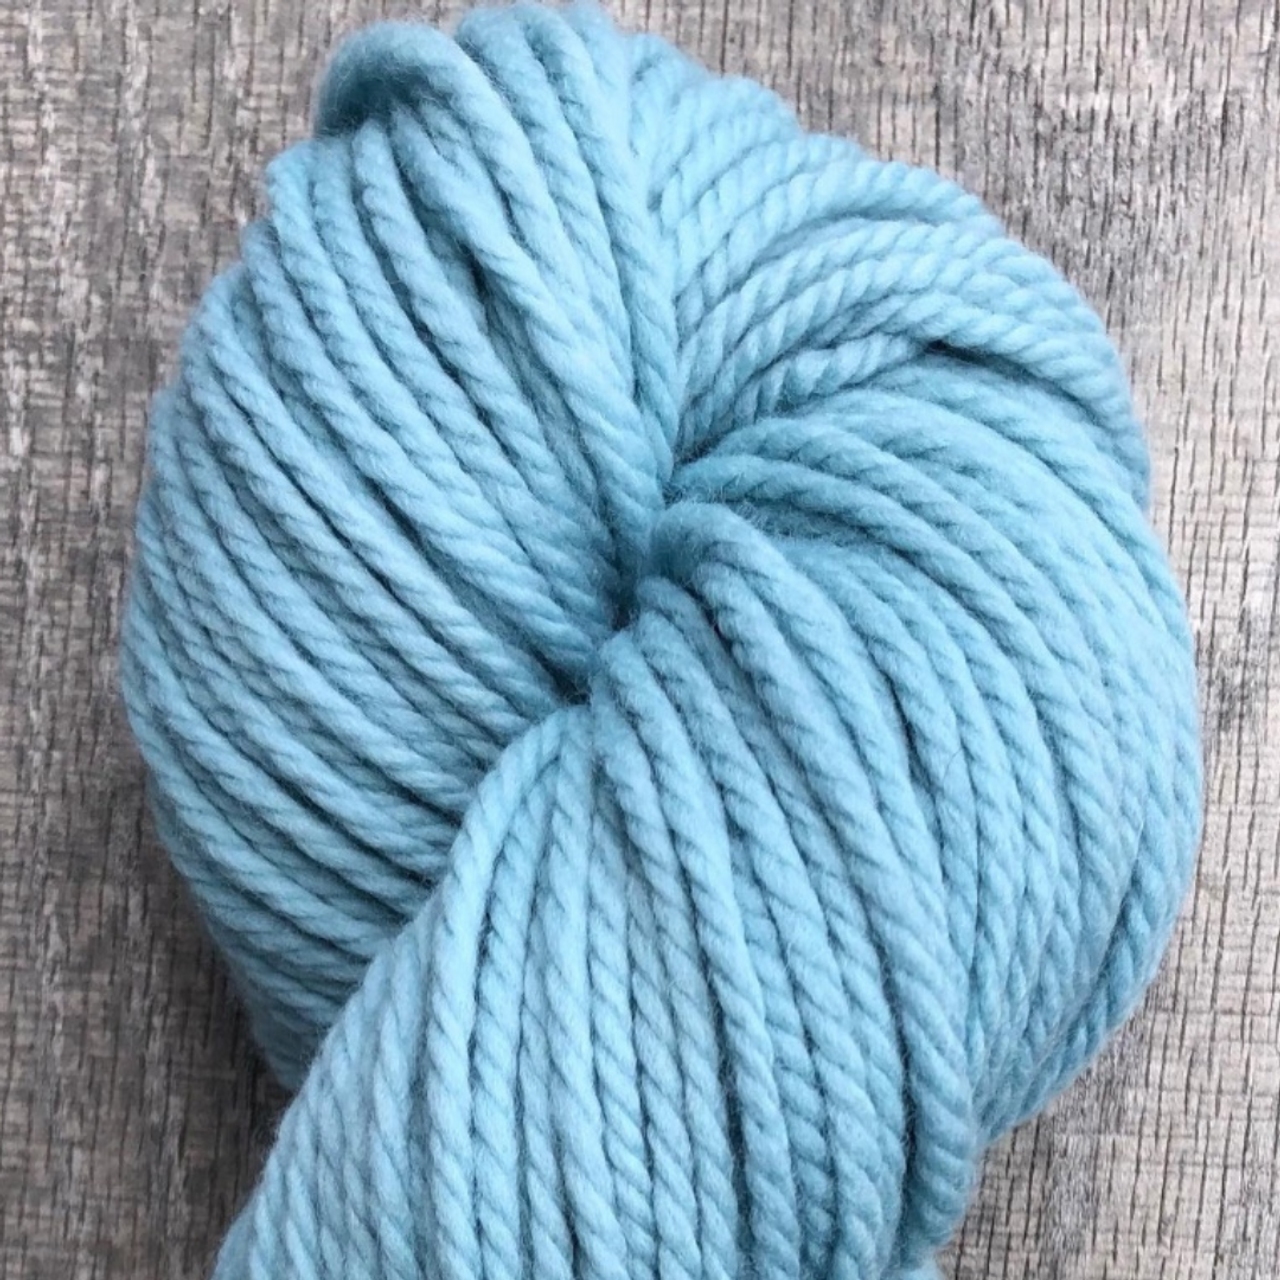 Super bulky weight yarn - Crazy for Ewe